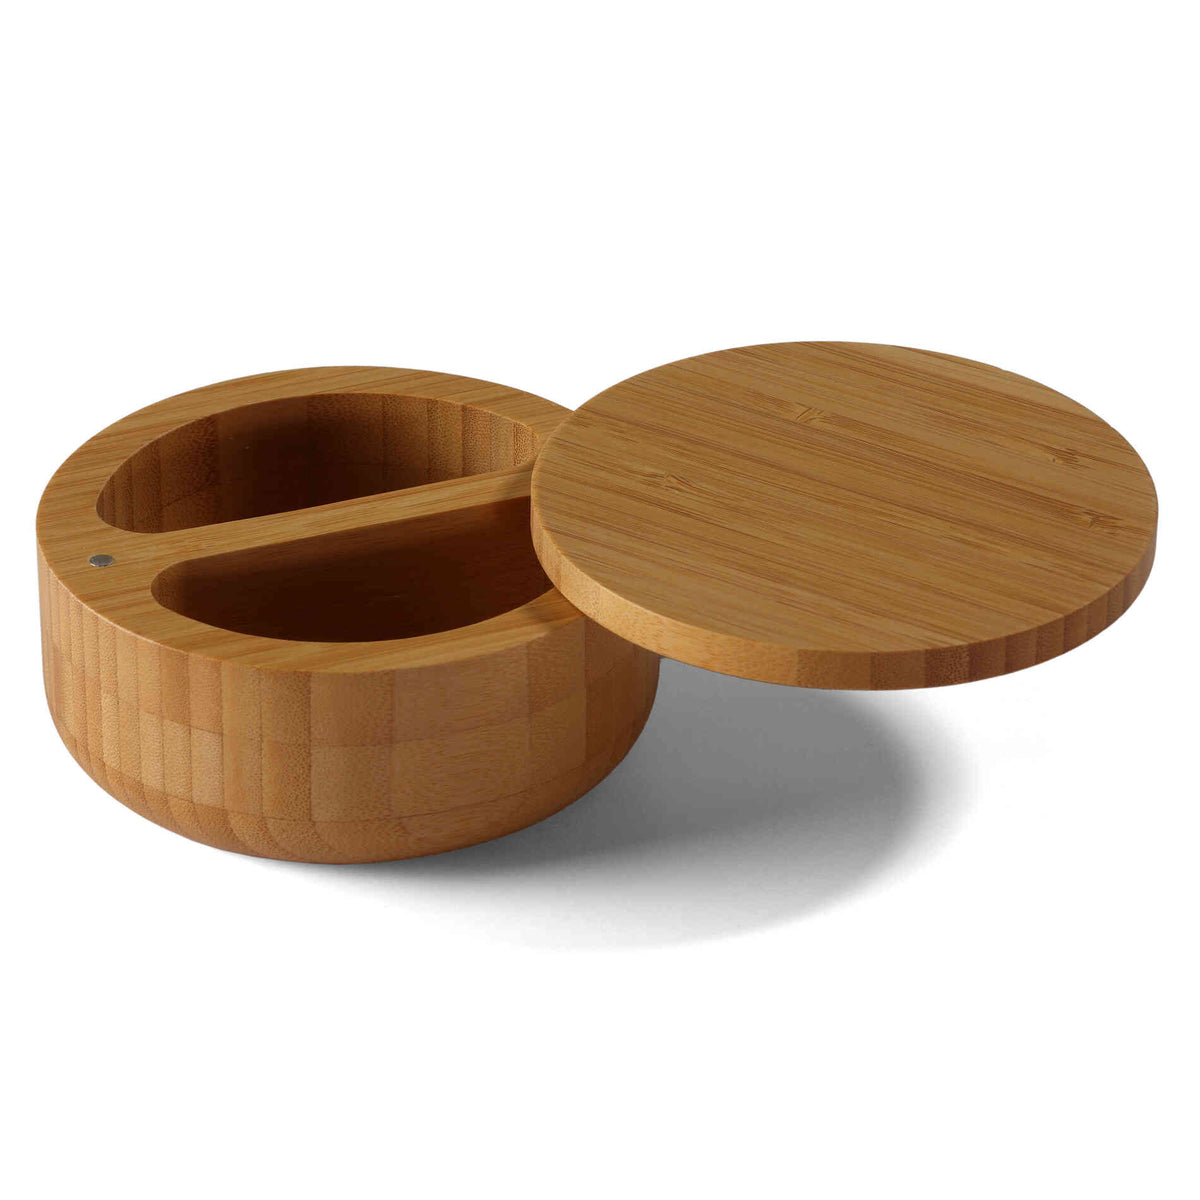 Cortesi Home Pinchi Natural Bamboo Salt and Pepper Herbs and Spice Box with Rotating Top